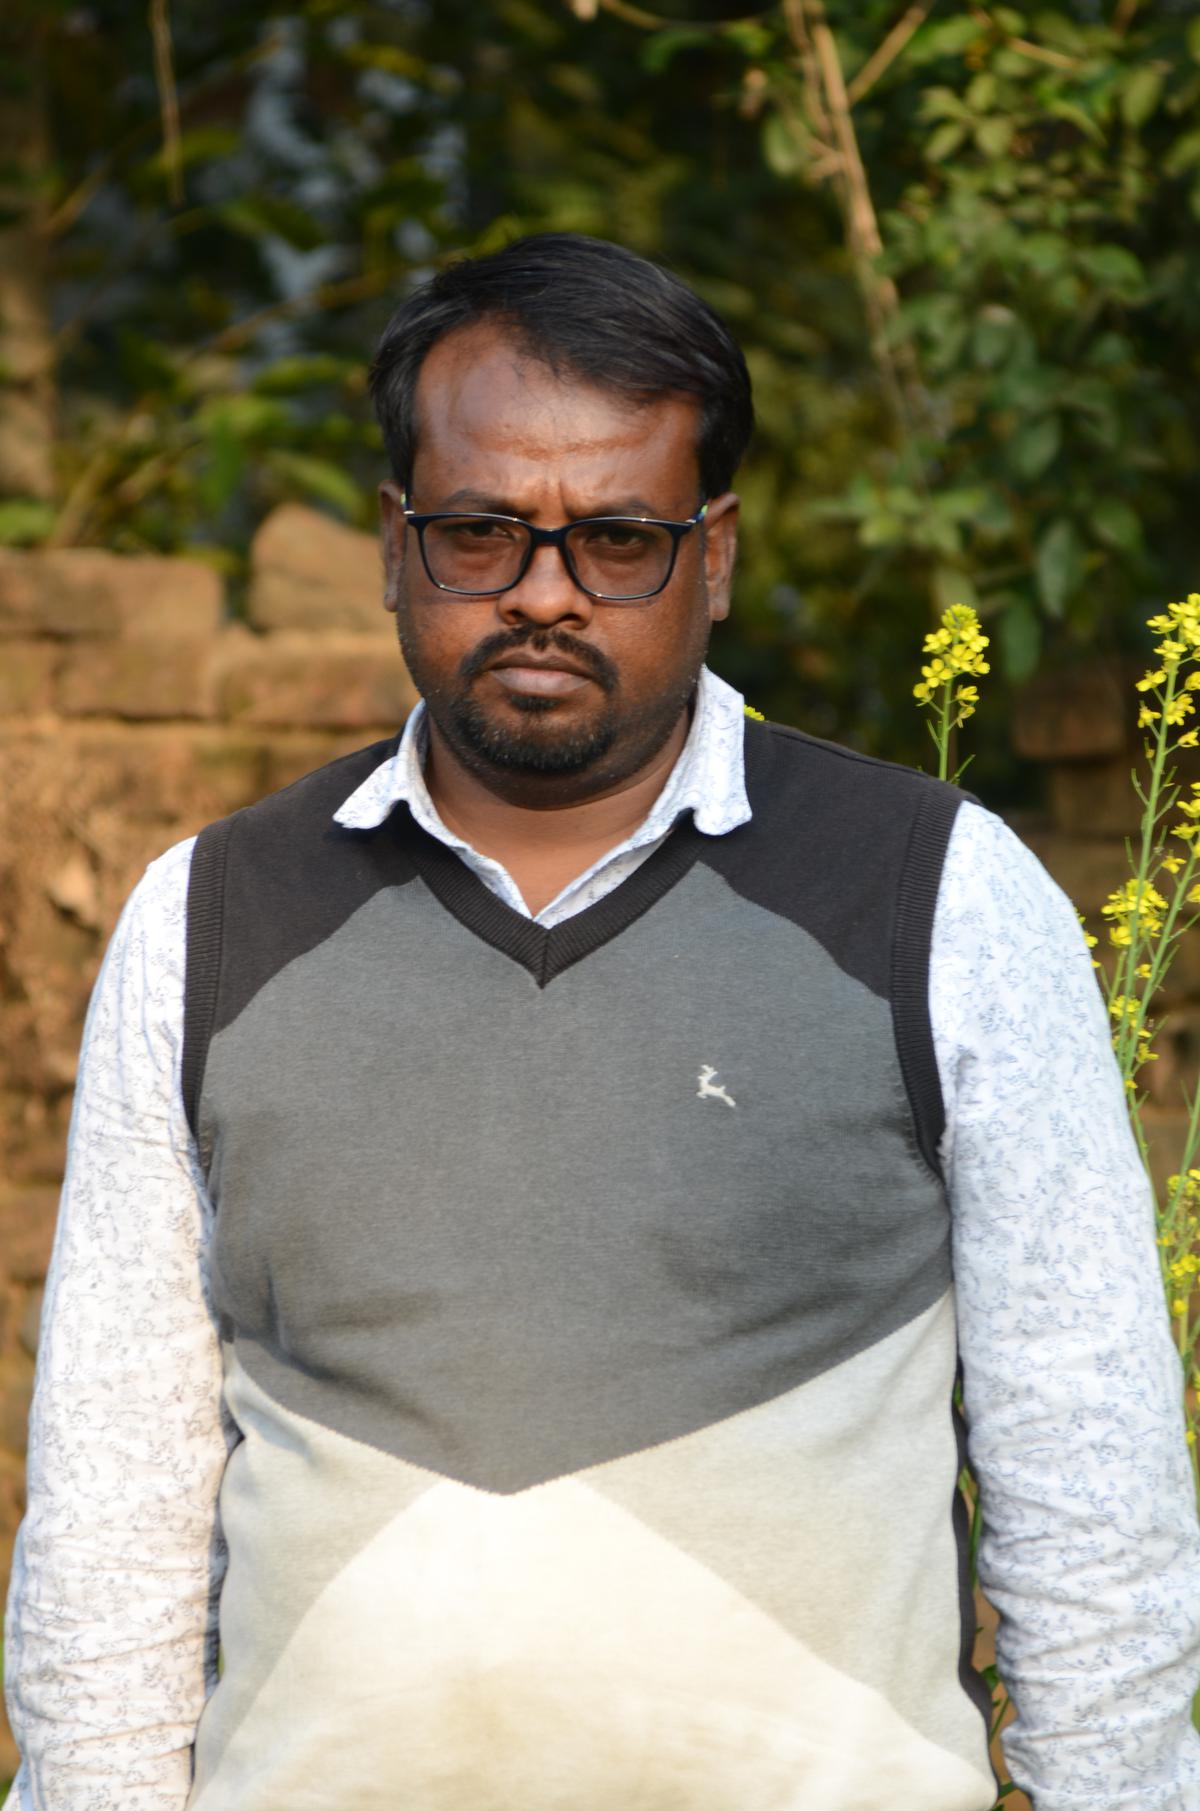 Sikandar Hembrom, 33, a local activist and social worker from the Giridih district.